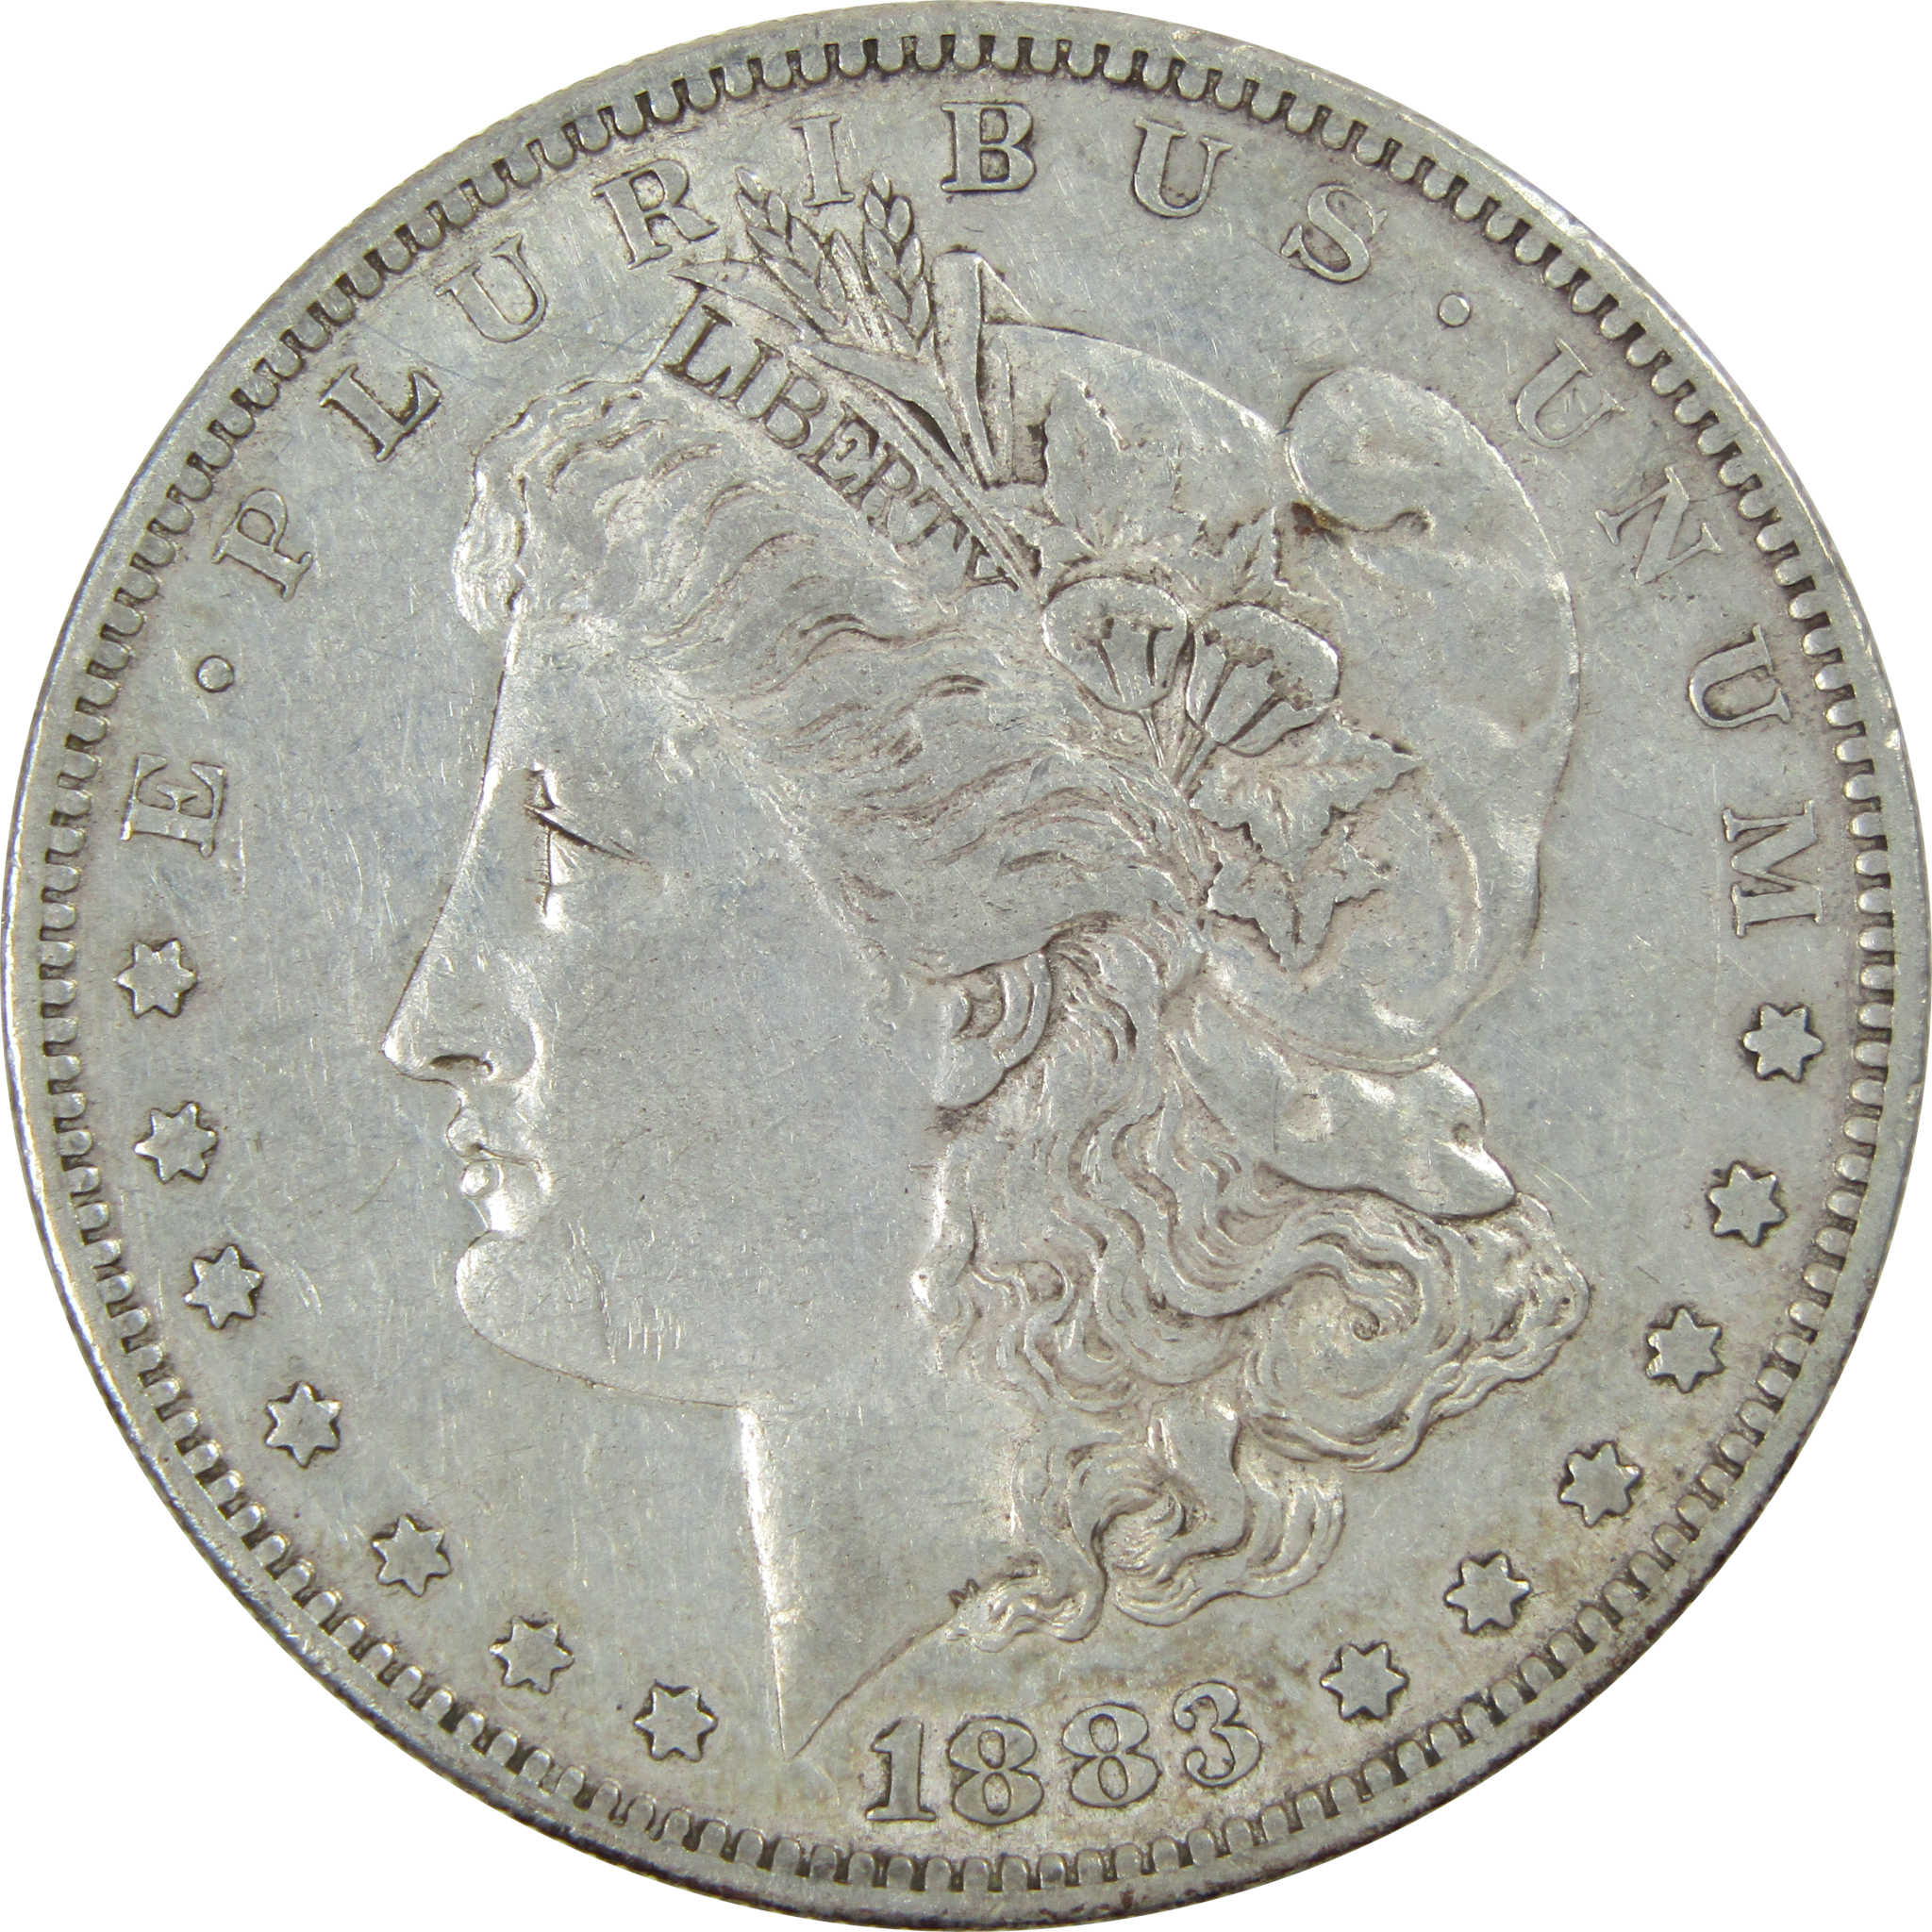 1883 S Morgan Dollar XF EF Extremely Fine Silver $1 Coin SKU:I13678 - Morgan coin - Morgan silver dollar - Morgan silver dollar for sale - Profile Coins &amp; Collectibles